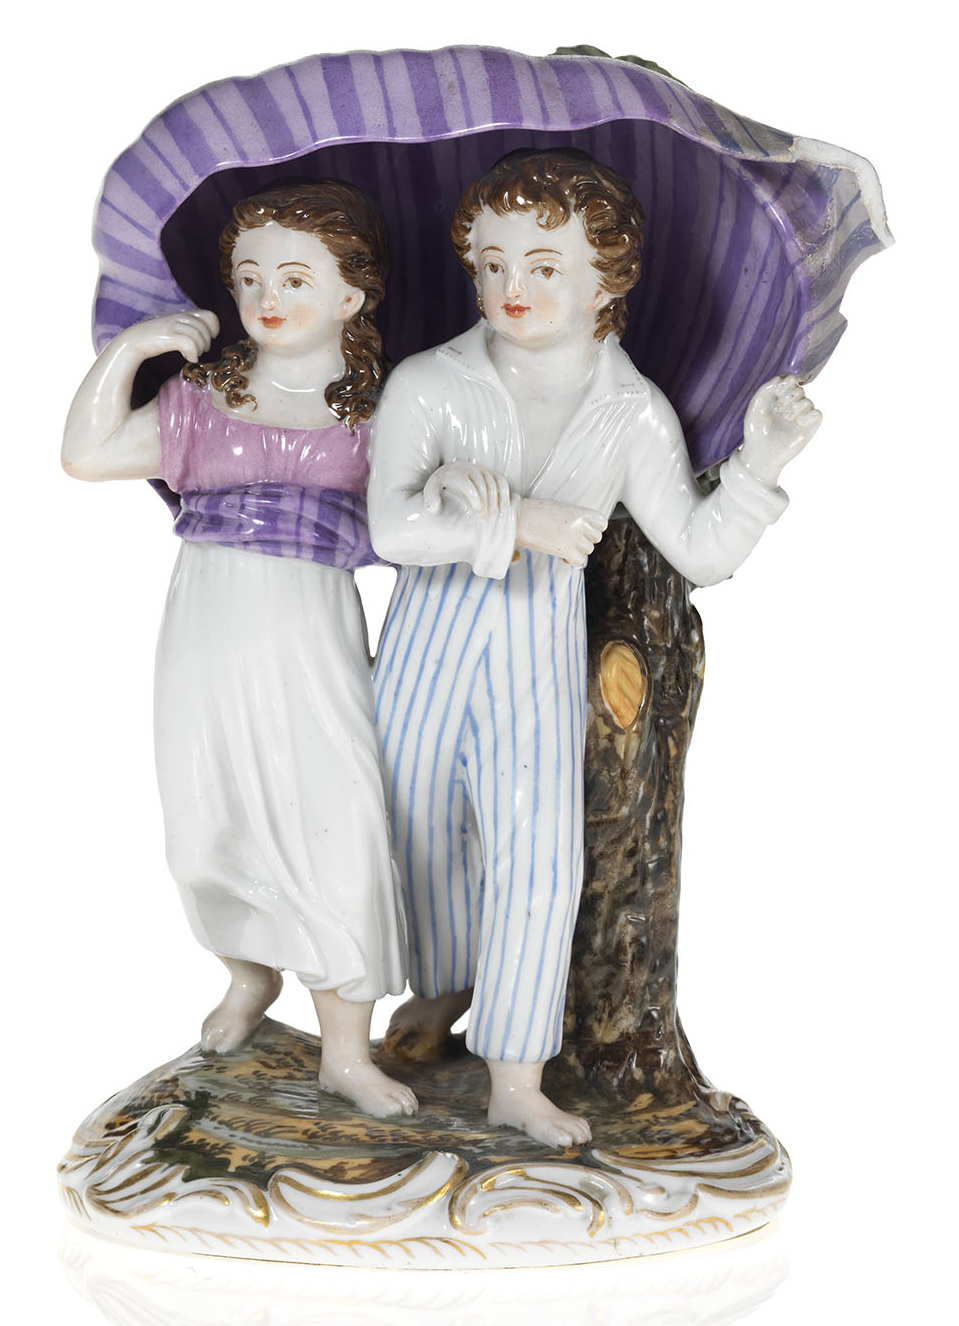 A Porcelain Composition of a Young Couple Running from the Storm